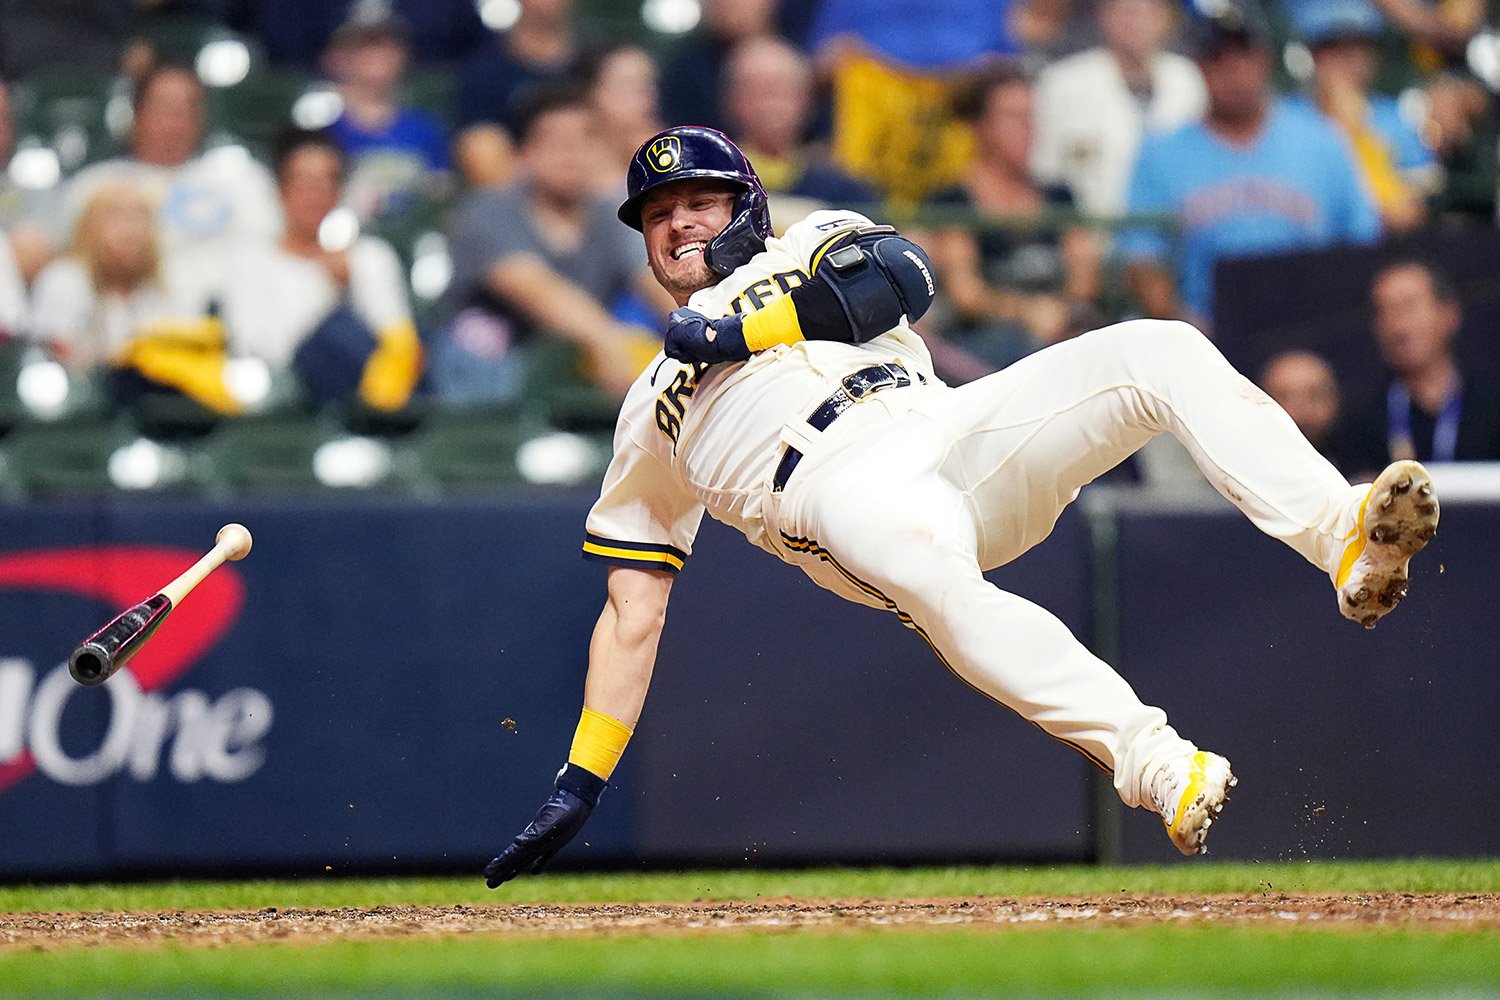 Counsell counting on Brewers hitters to bounce back